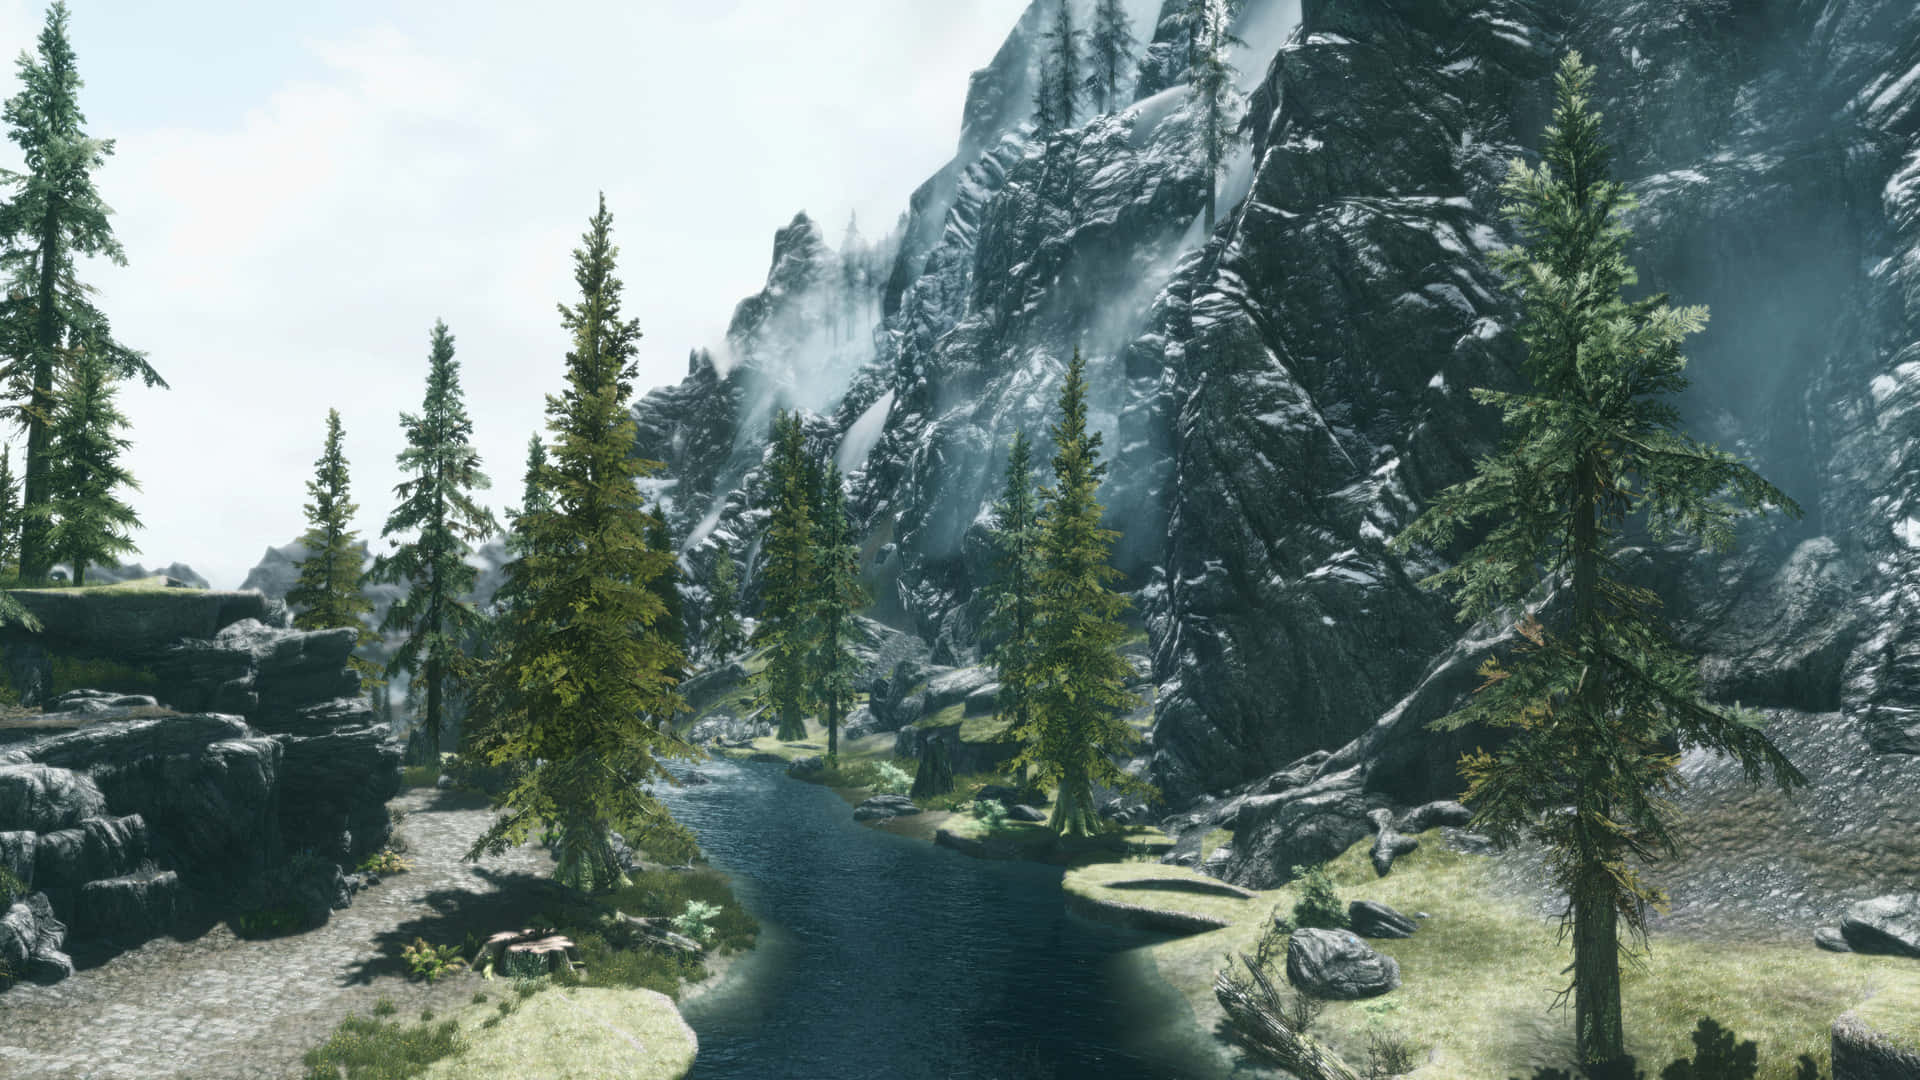 Travel to the depths of a fantasy world with this "Skyrim Landscape". Wallpaper